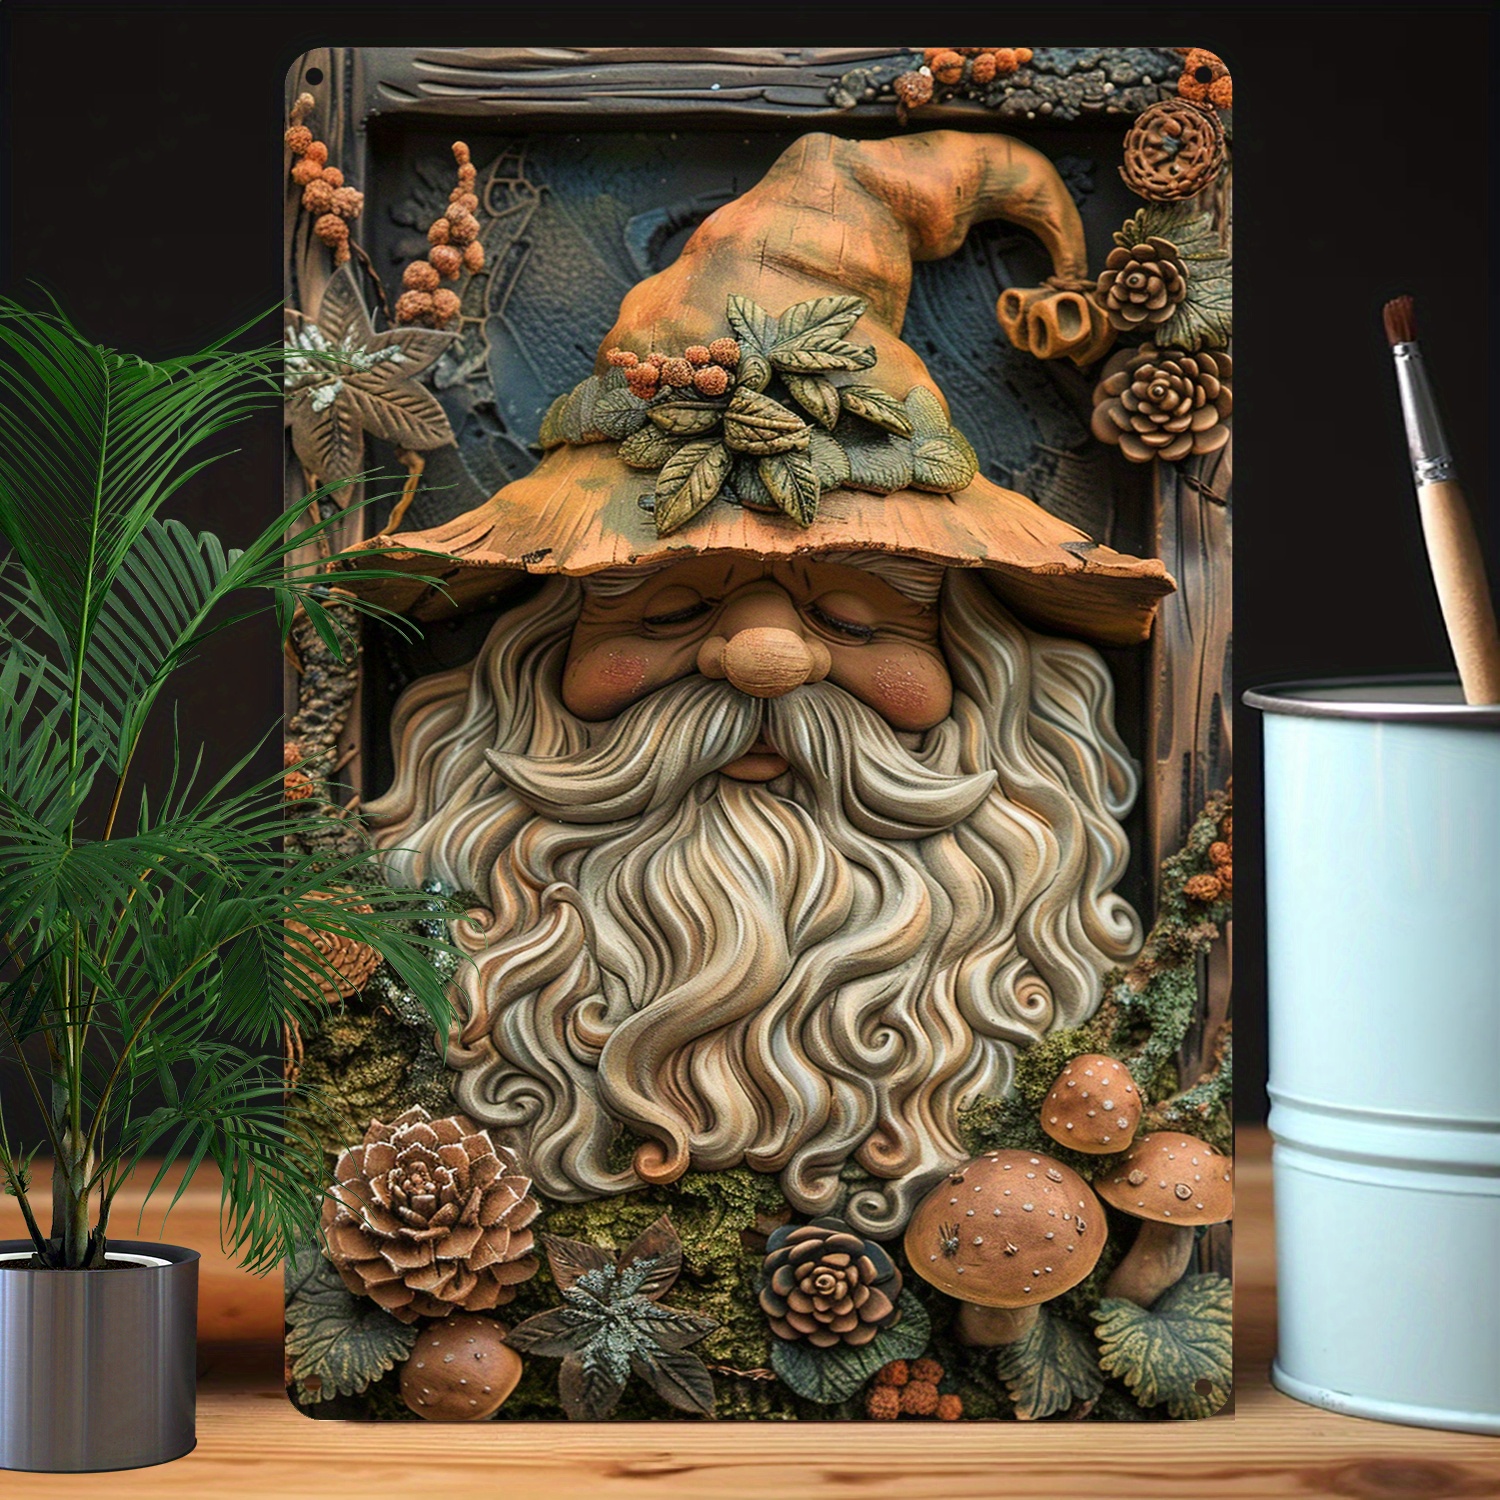 

Aluminum Metal Wall Art, 1pc, 3d Effect Forest Wizard Design, Moisture Resistant, Durable Bend-resistant Metal Sign For Home Office Decor - Woodland Gnome Decoration A3208